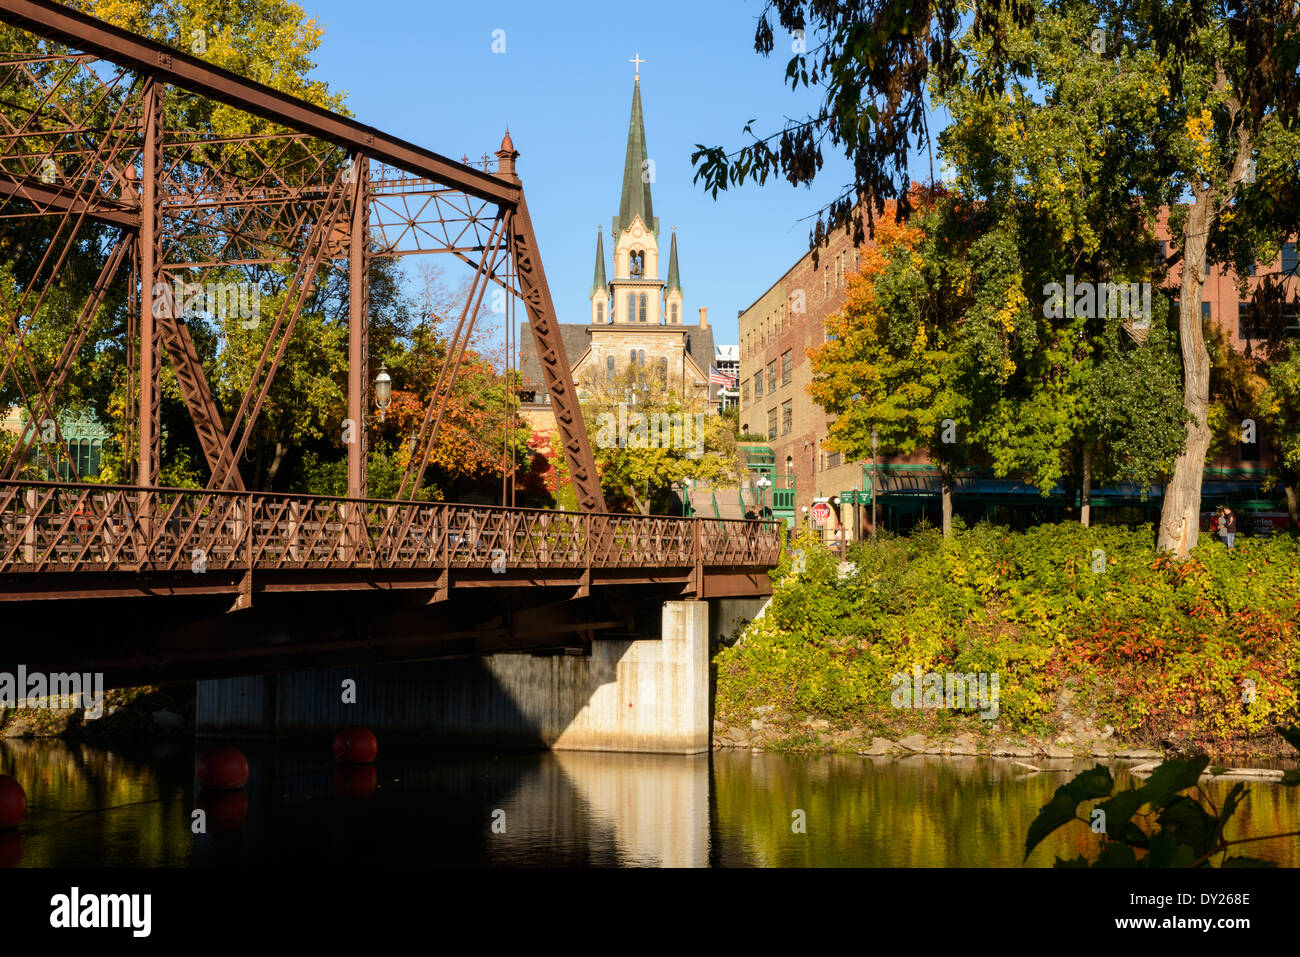 Our Lady of Lourdes Catholic Church and steel truss bridge at St Anthony Main area of Minneapolis. Stock Photo